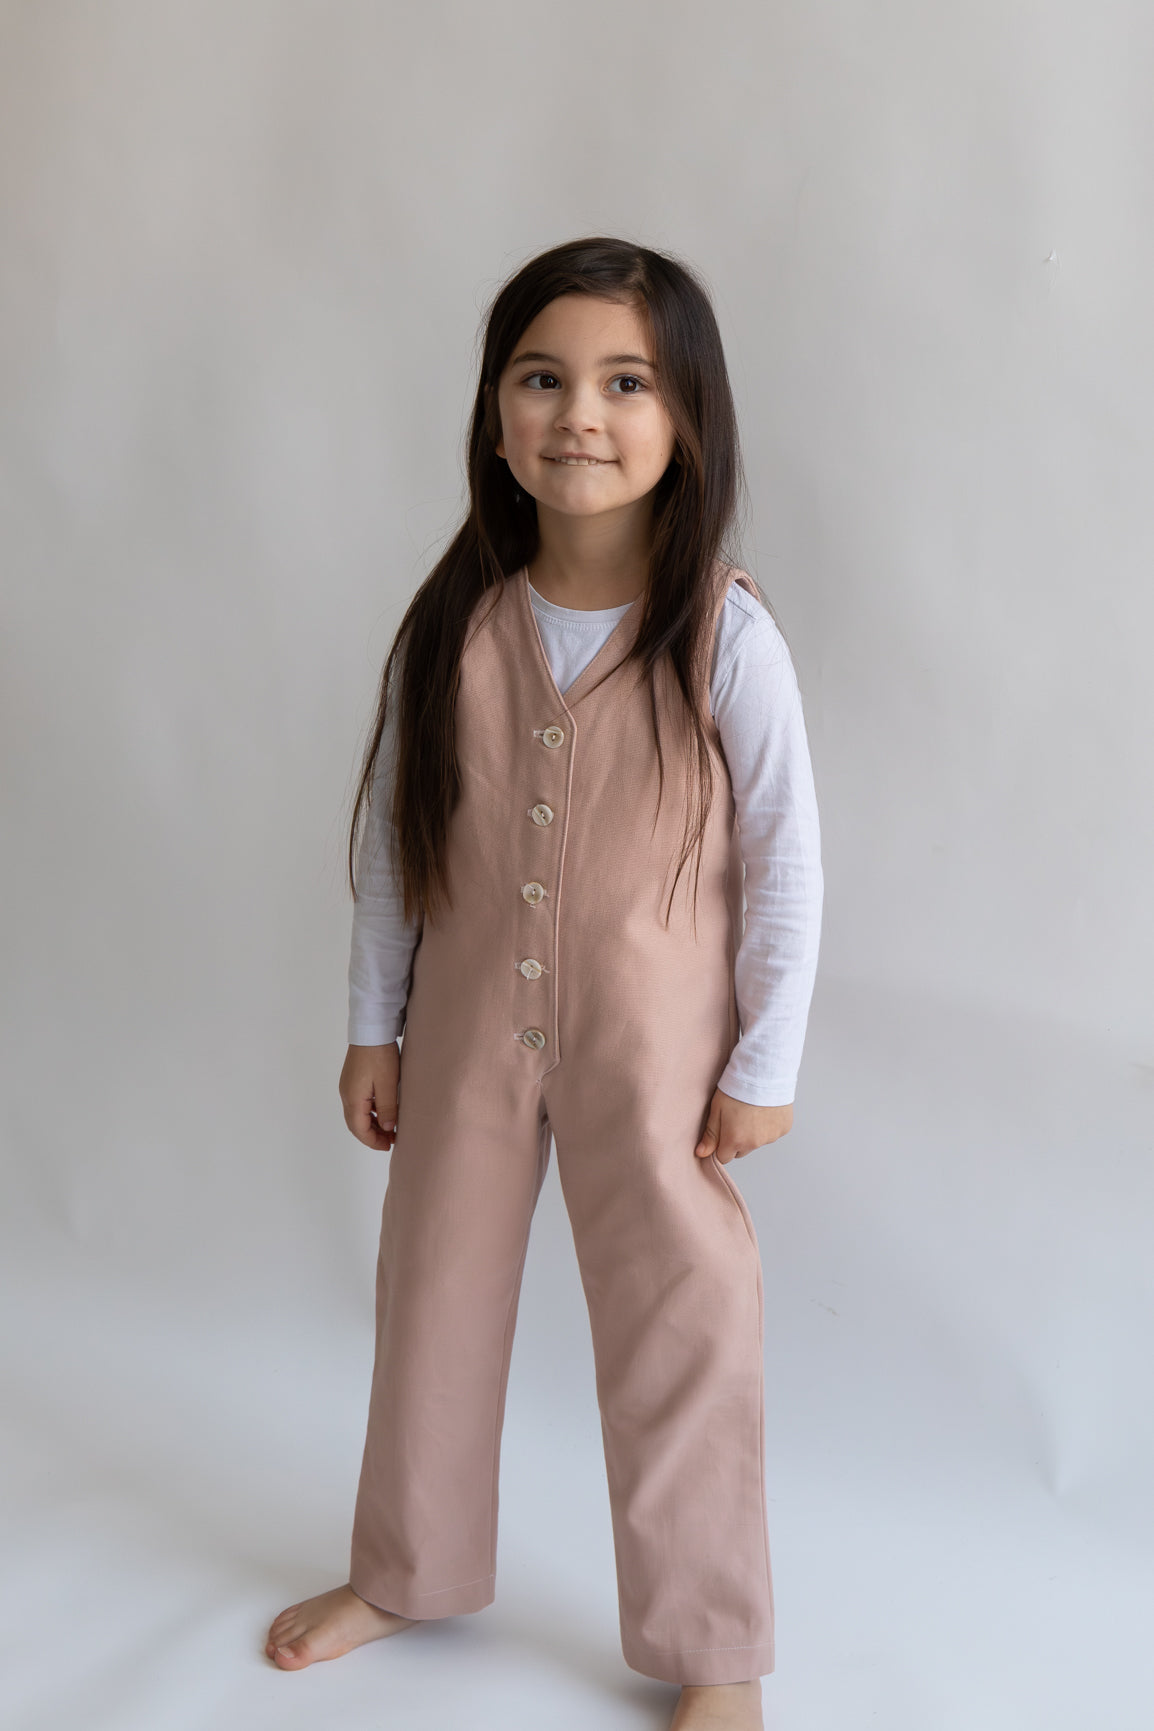 soft pink pastel pink tea rose color Kids Mini Jumpsuit overall workwear cotton canvas 5 buttons v-neck OEKO-TEX sustainable clothes handmade